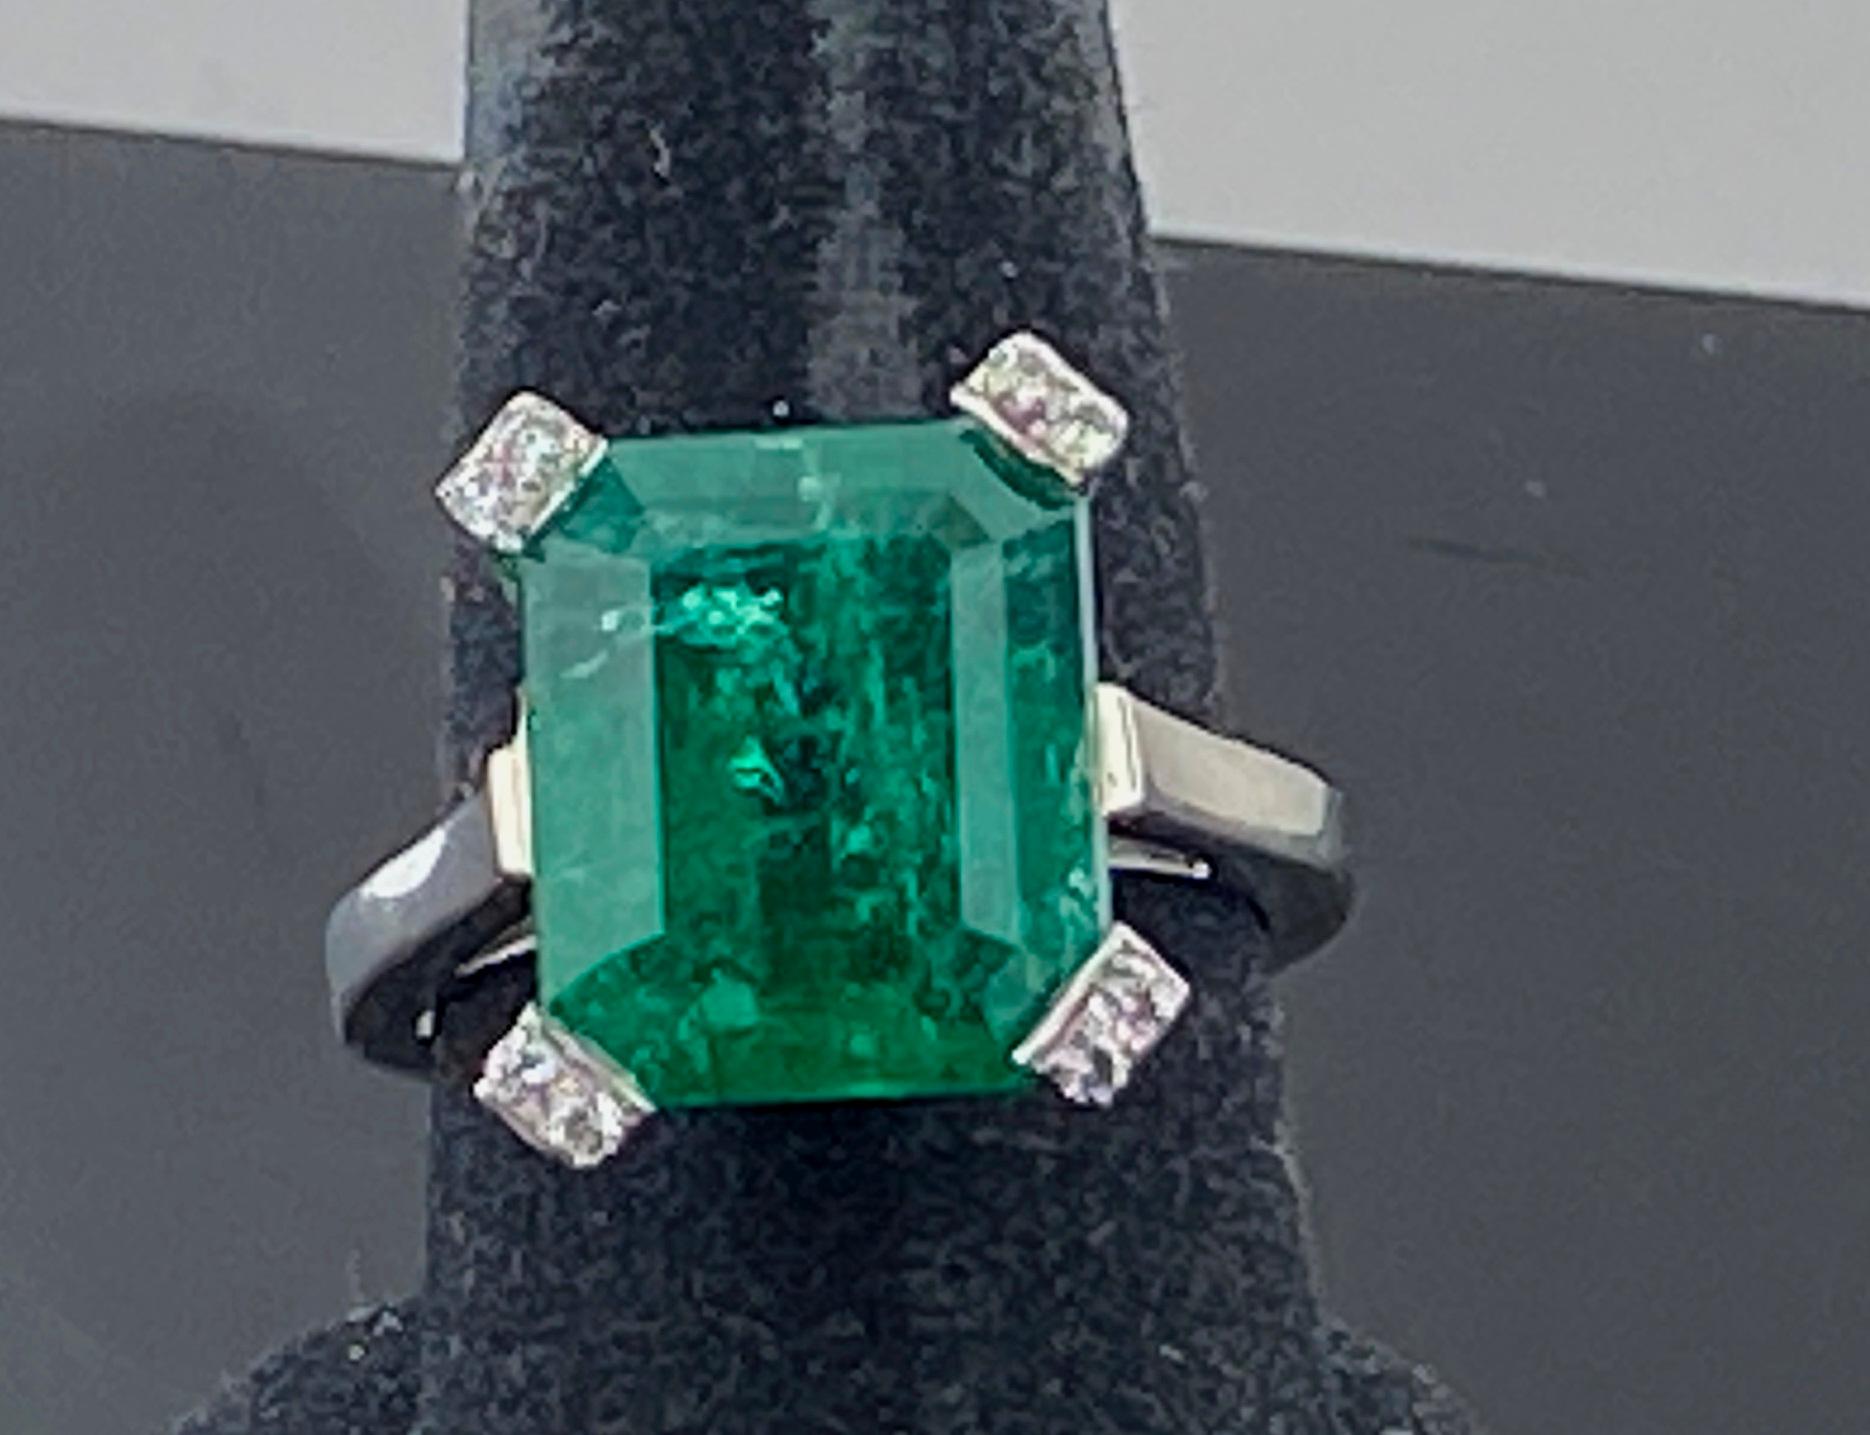 Set in Platinum is a 13.03 carat Emerald cut Emerald with 8 small round brilliant cut diamonds weighing 0.10 carats.  Color F-G, VS-1, Size 9.